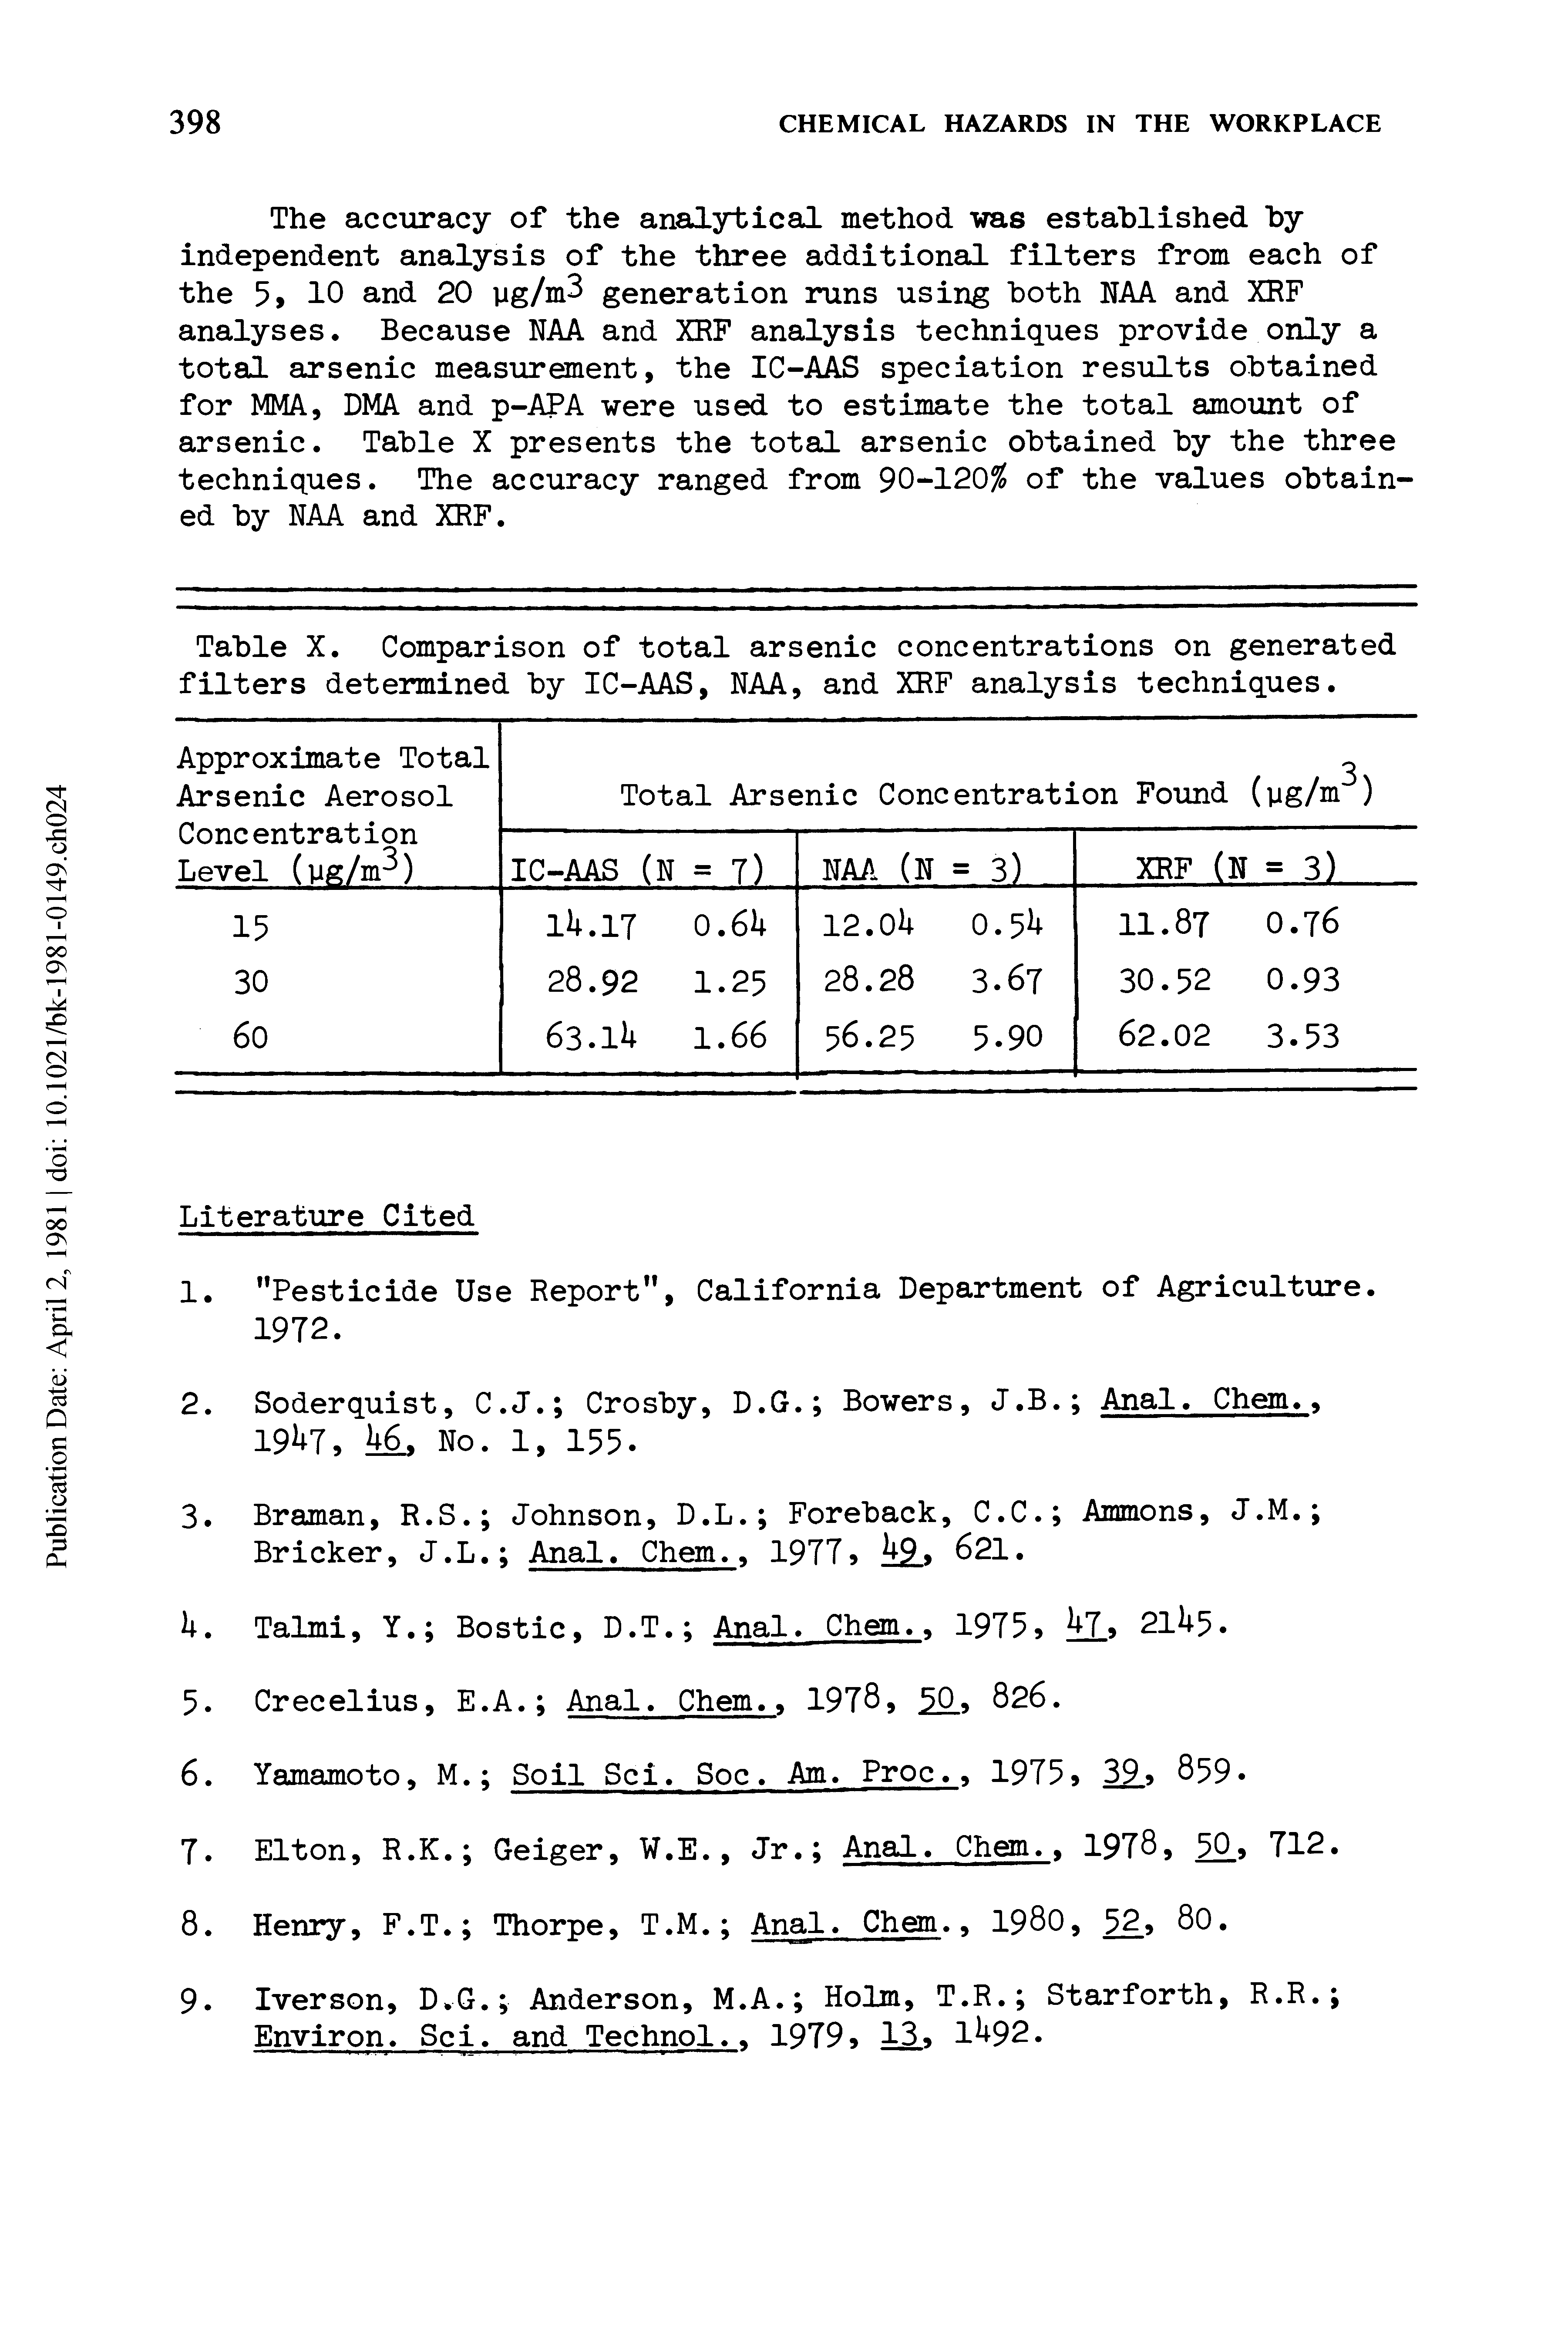 Table X. Comparison of total arsenic concentrations on generated filters determined by IC-AAS, NAA, and XRF analysis techniques.